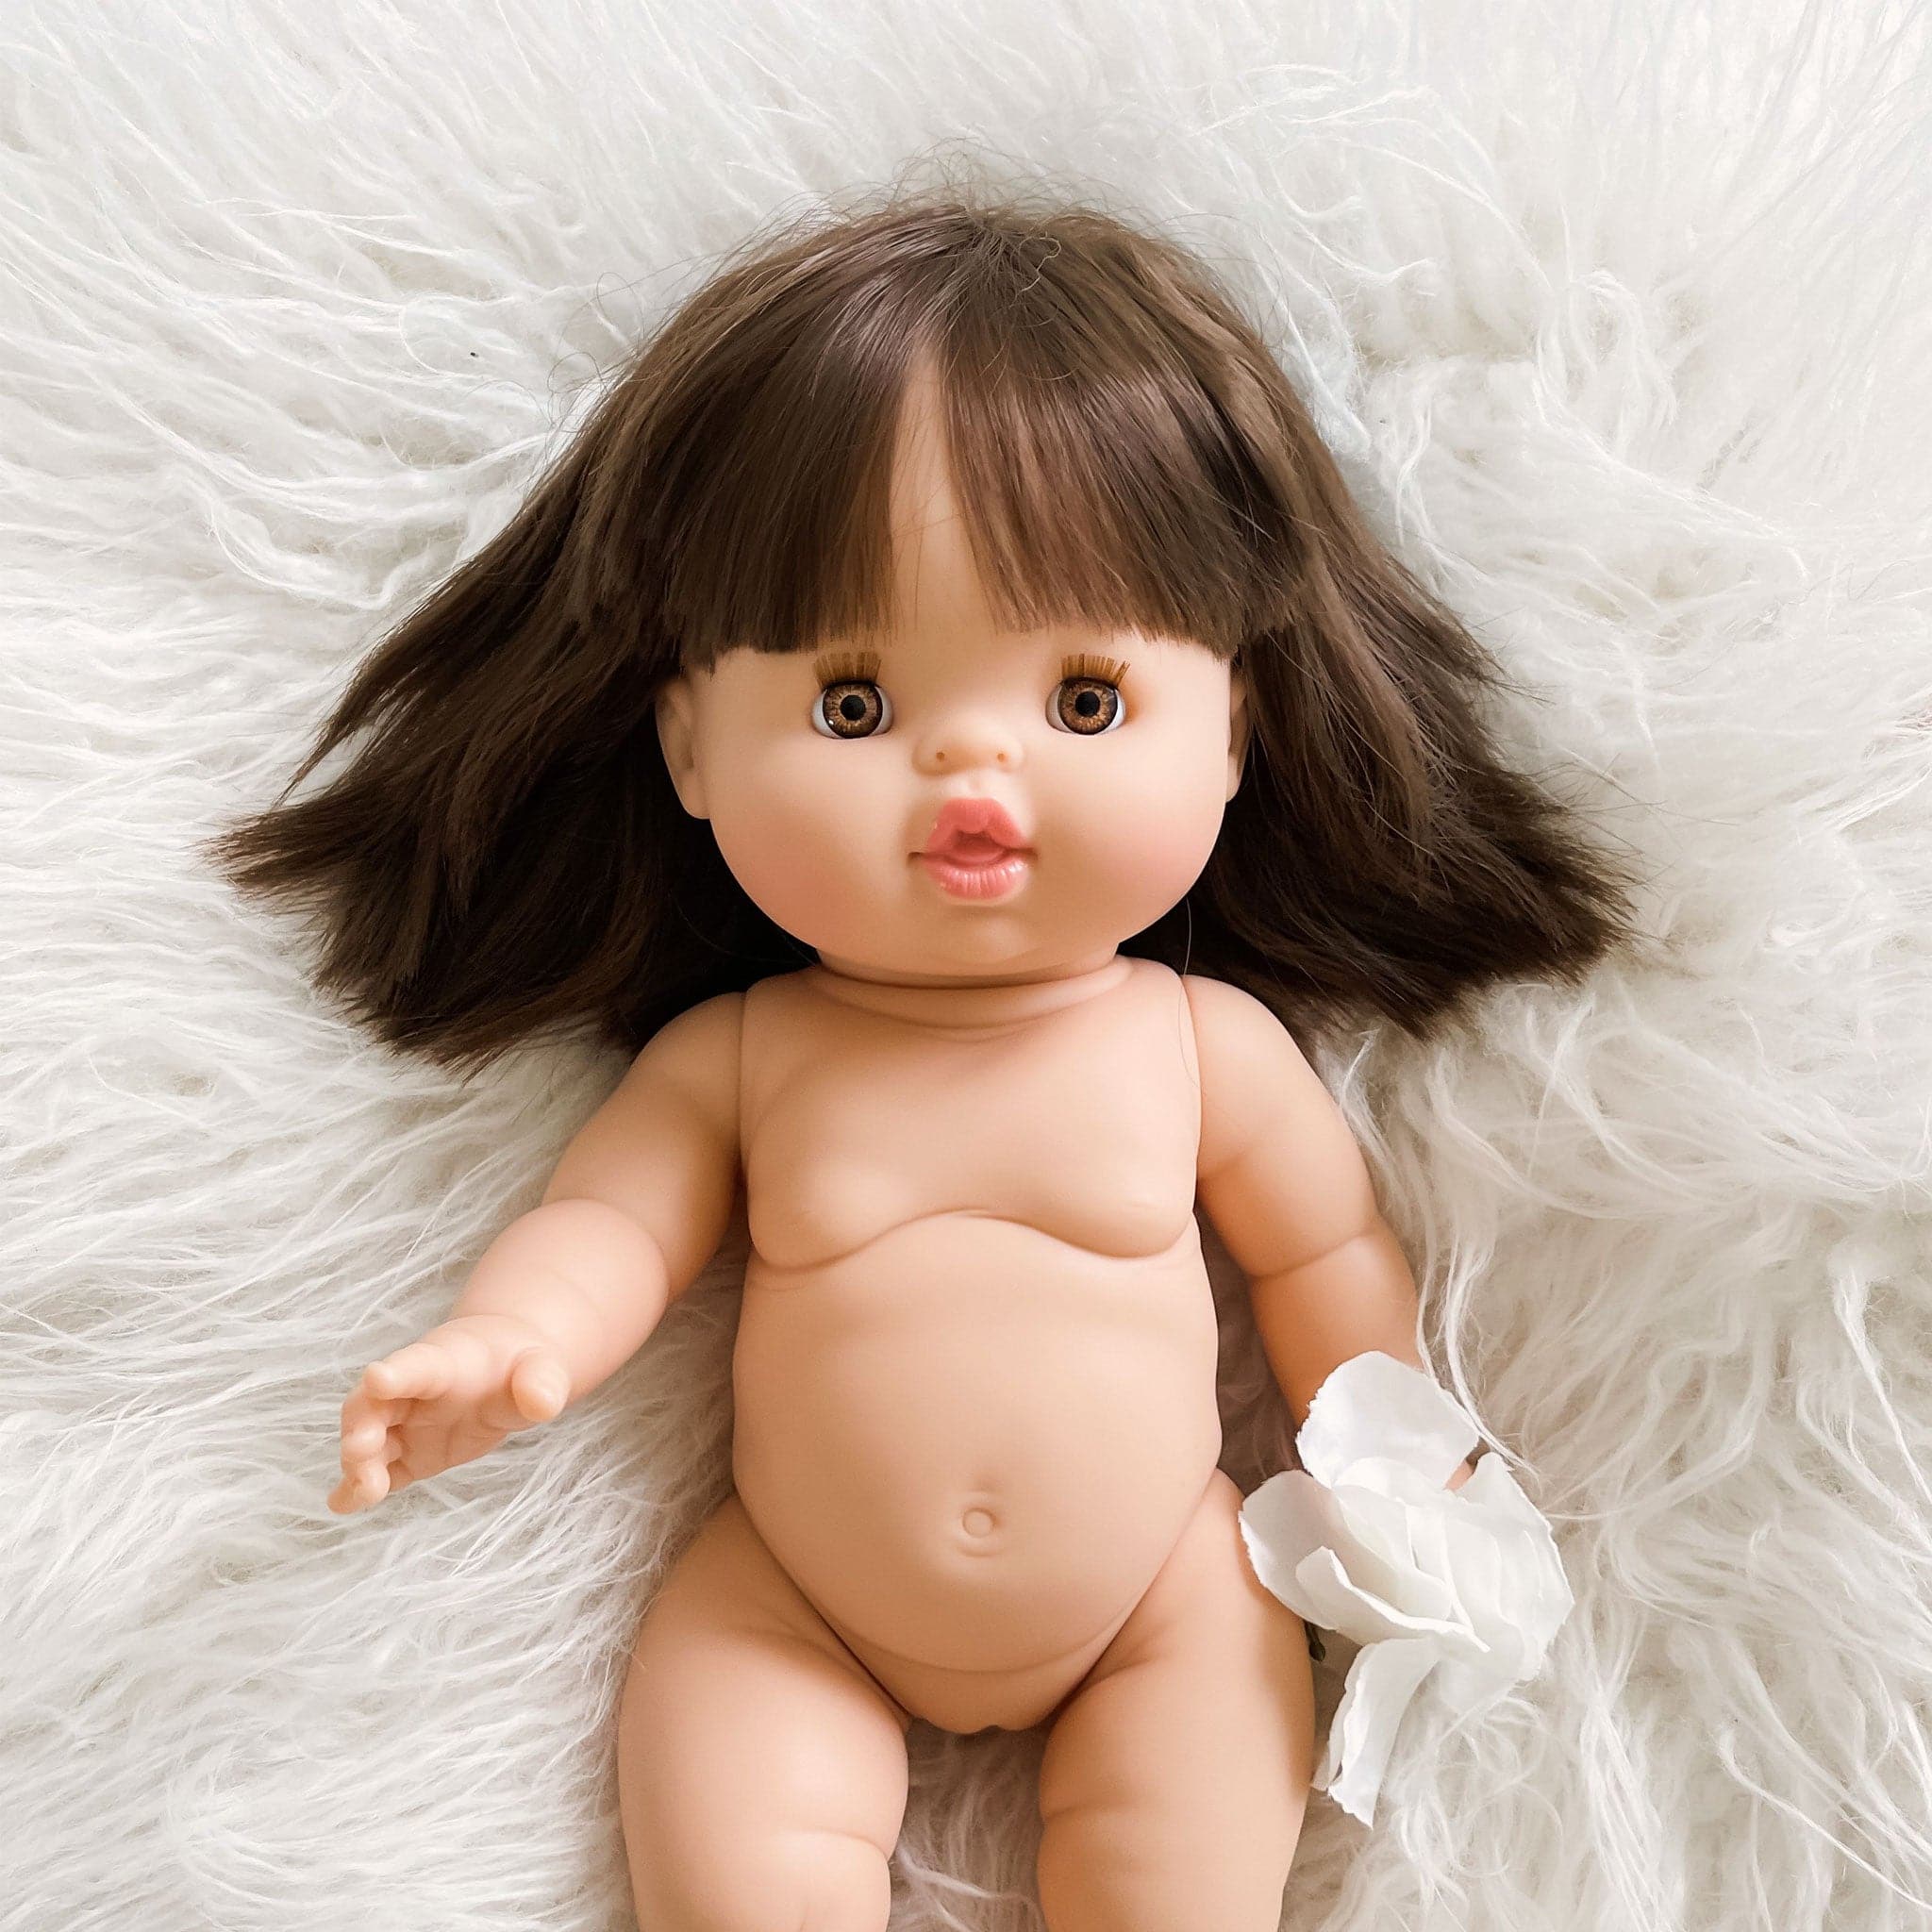 A baby doll with brown straight hair and amber colored eyes. 